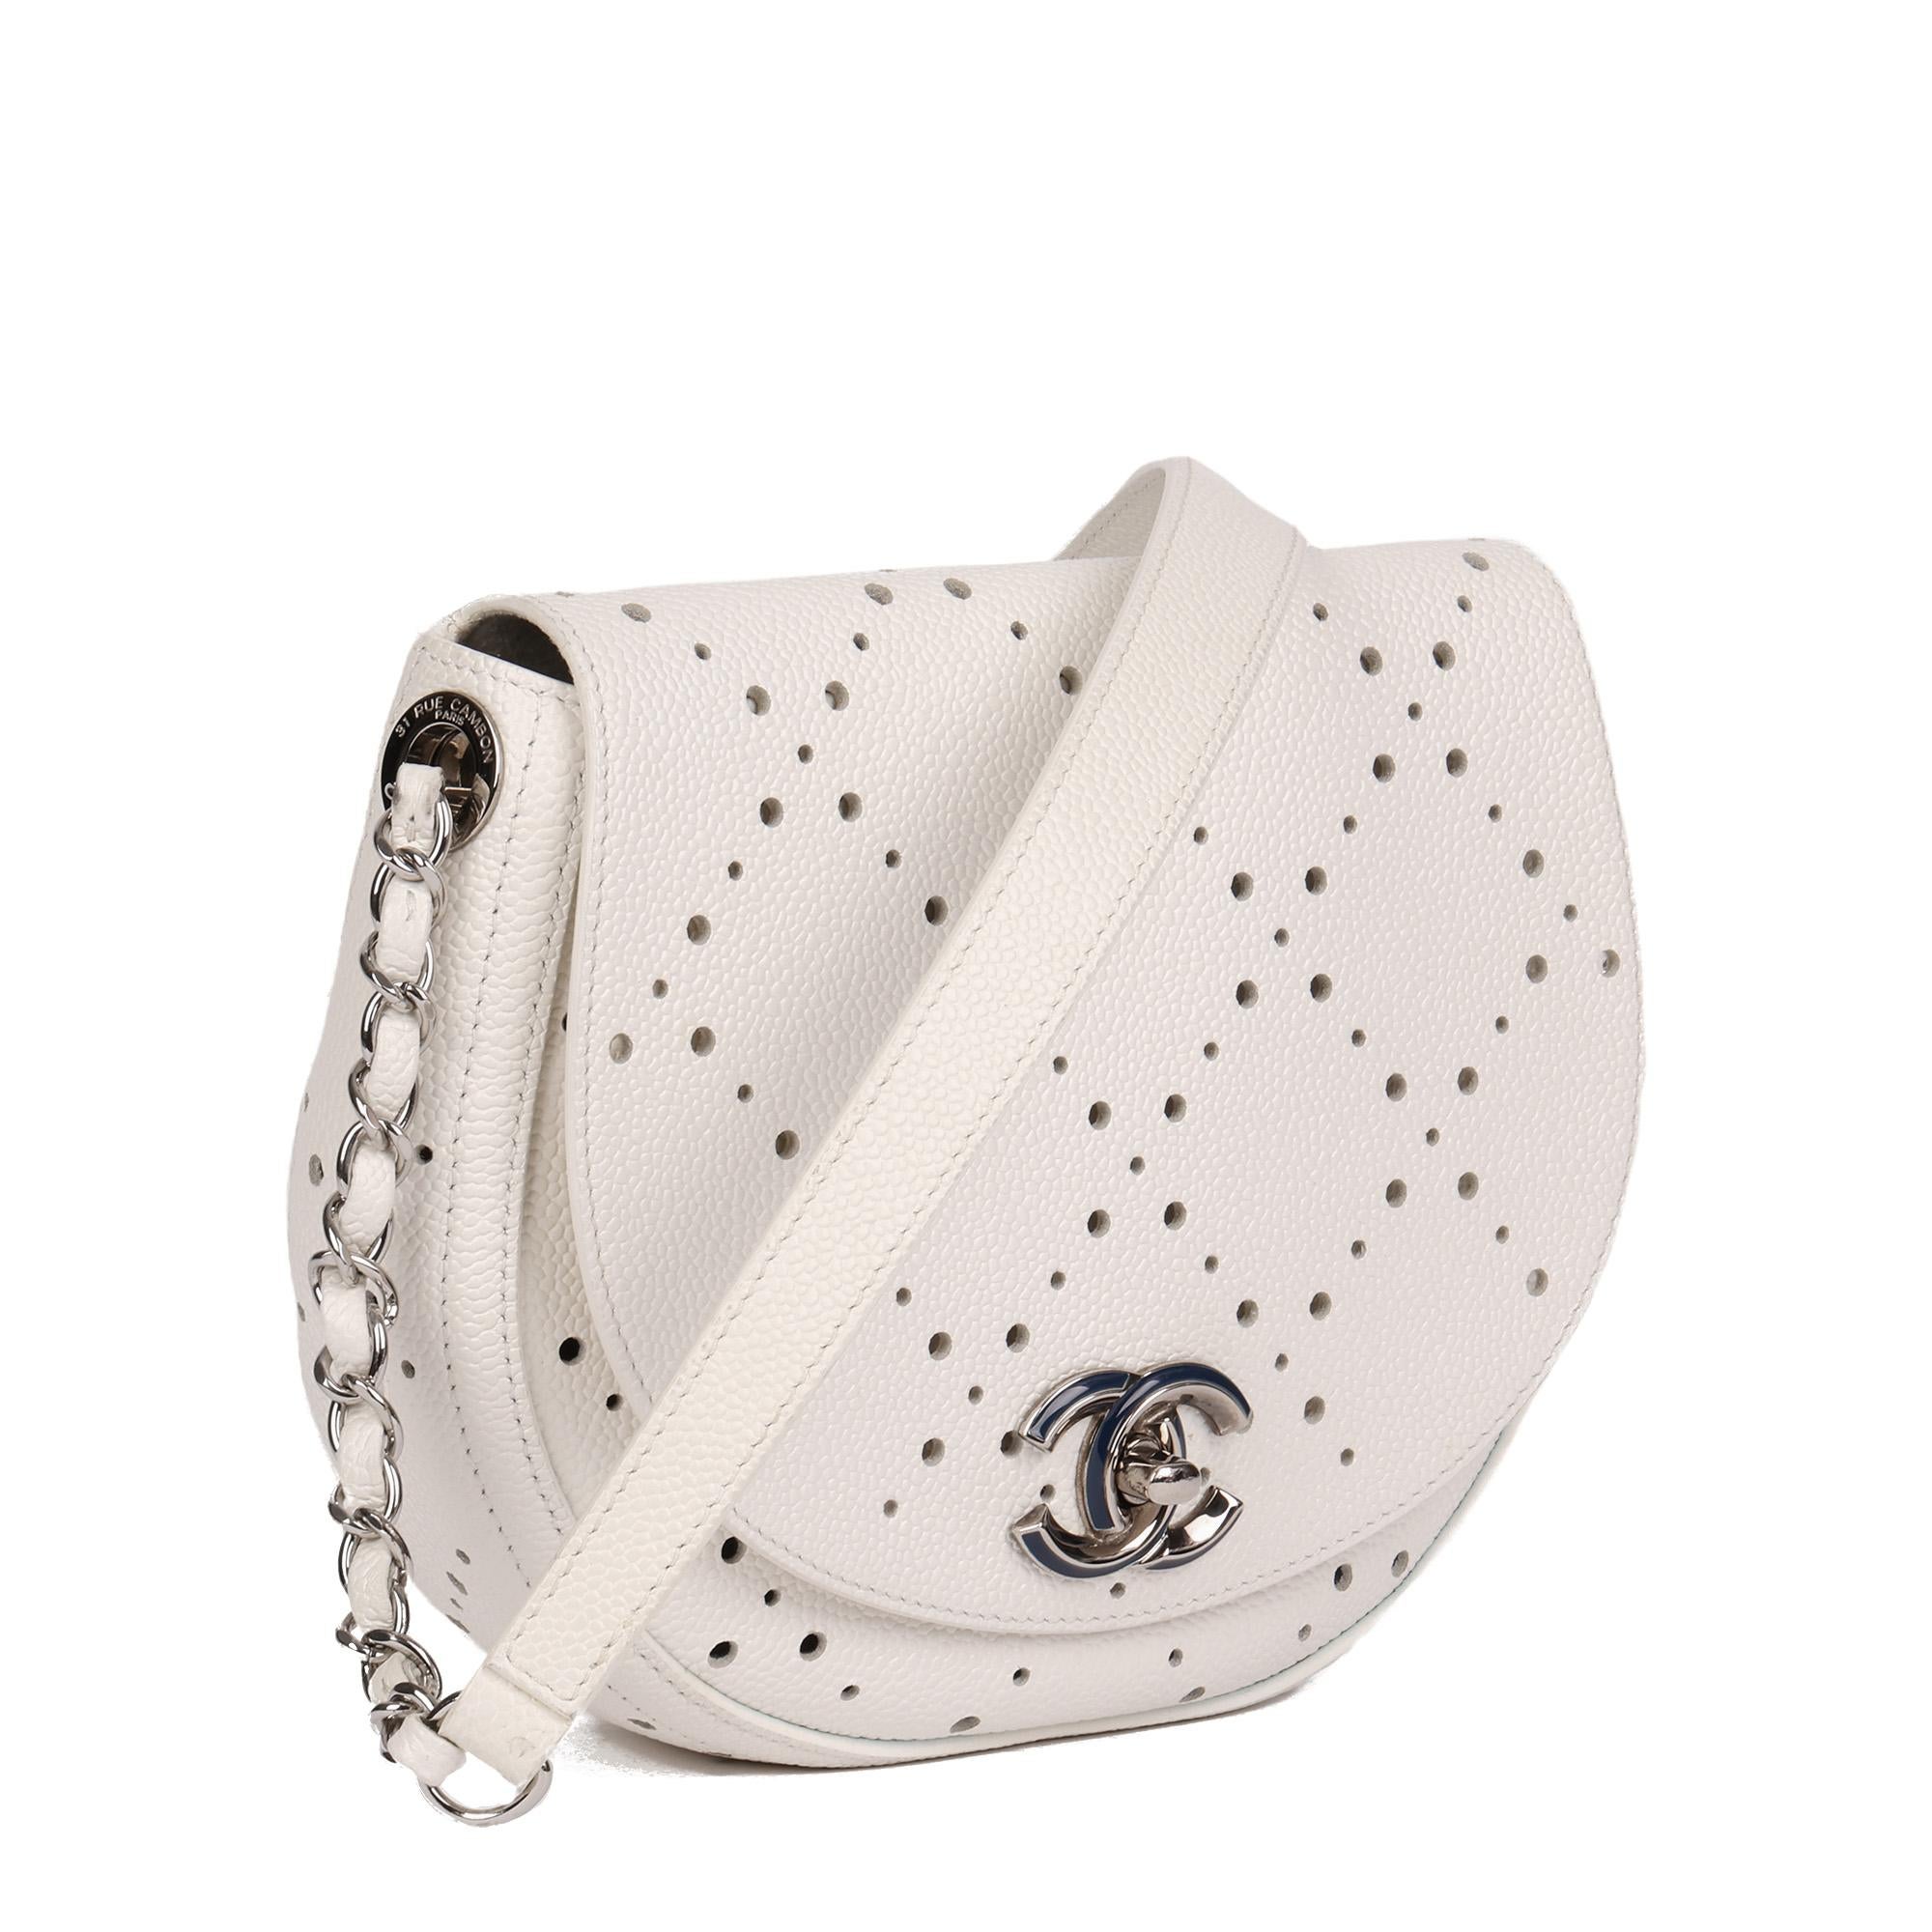 CHANEL
White Perforated Caviar Leather CC Perforated Shoulder Bag

Serial Number: 24080735
Age (Circa): 2018
Accompanied By: Chanel Dust Bag, Authenticity Card
Authenticity Details: Authenticity Card, Serial Sticker (Made in Italy)
Gender: